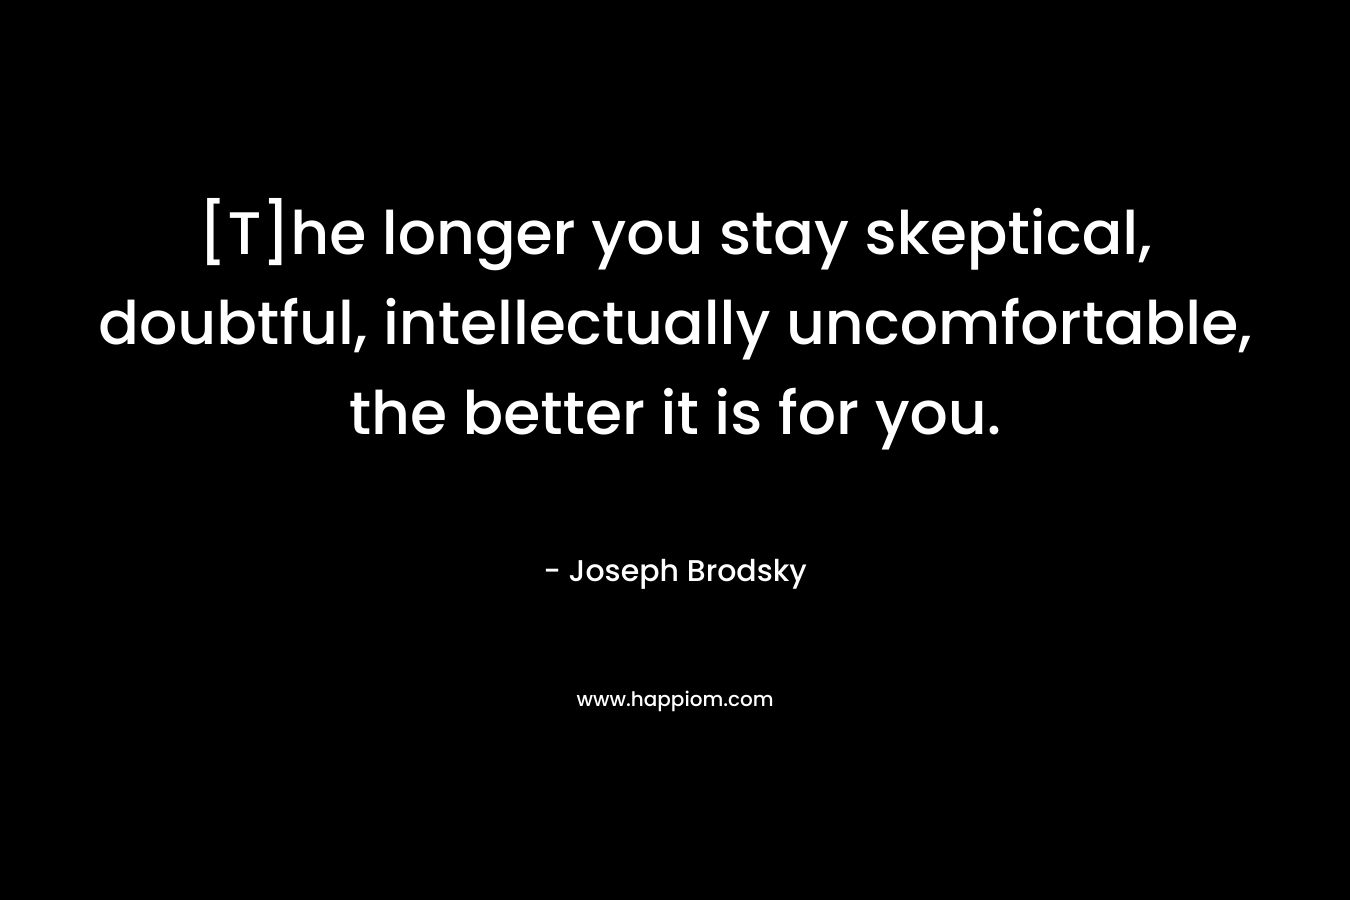 [T]he longer you stay skeptical, doubtful, intellectually uncomfortable, the better it is for you. – Joseph Brodsky